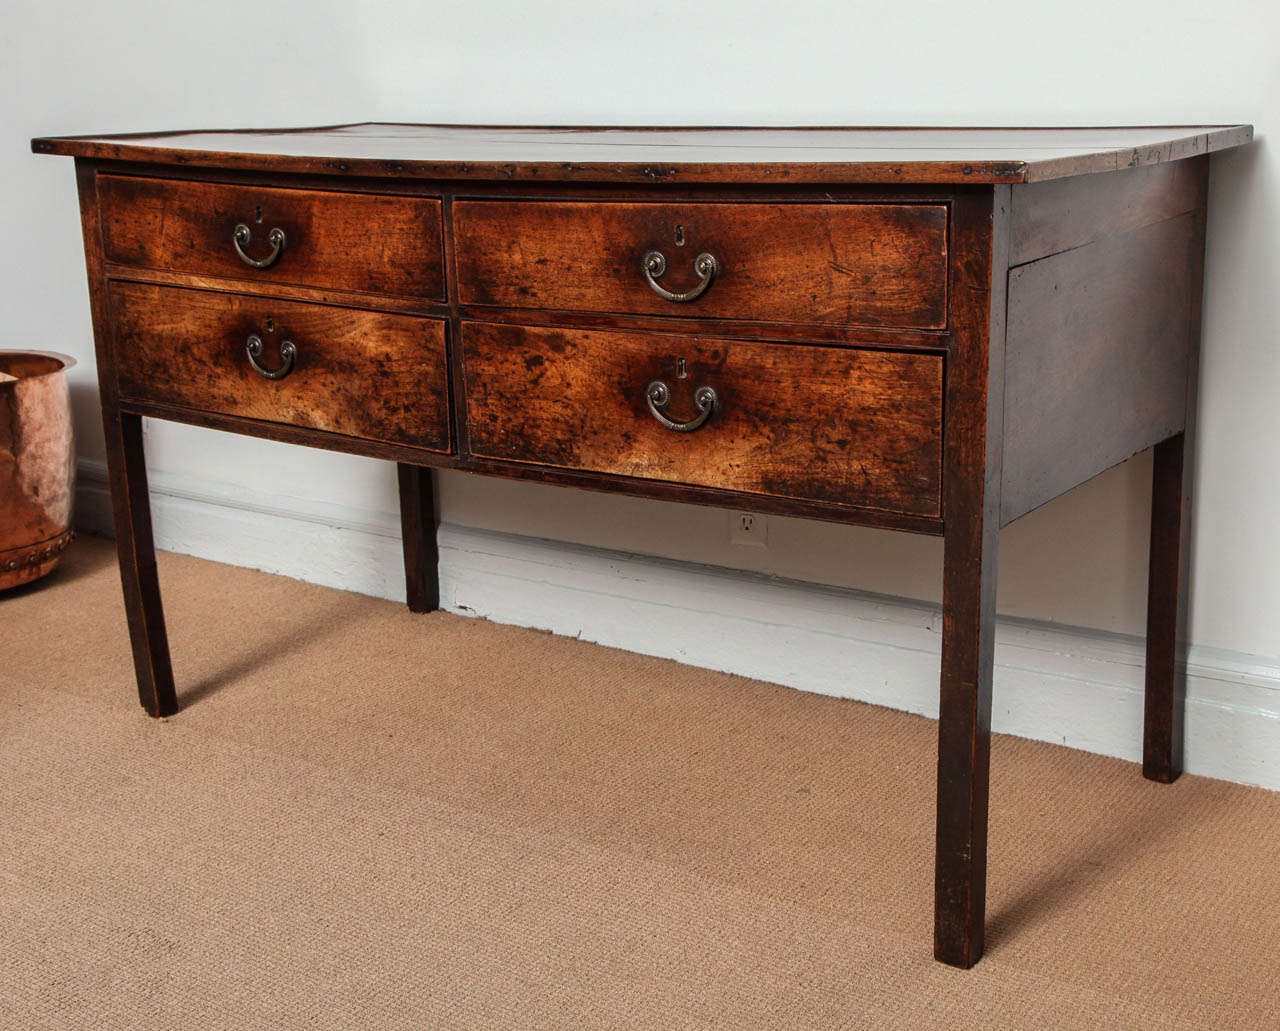 Very fine English solid walnut hall table, the two plank top with raised gallery edge over two rows of drawers, standing on square tapered legs, the whole a study in understatement and possessing a most luscious color and patina.